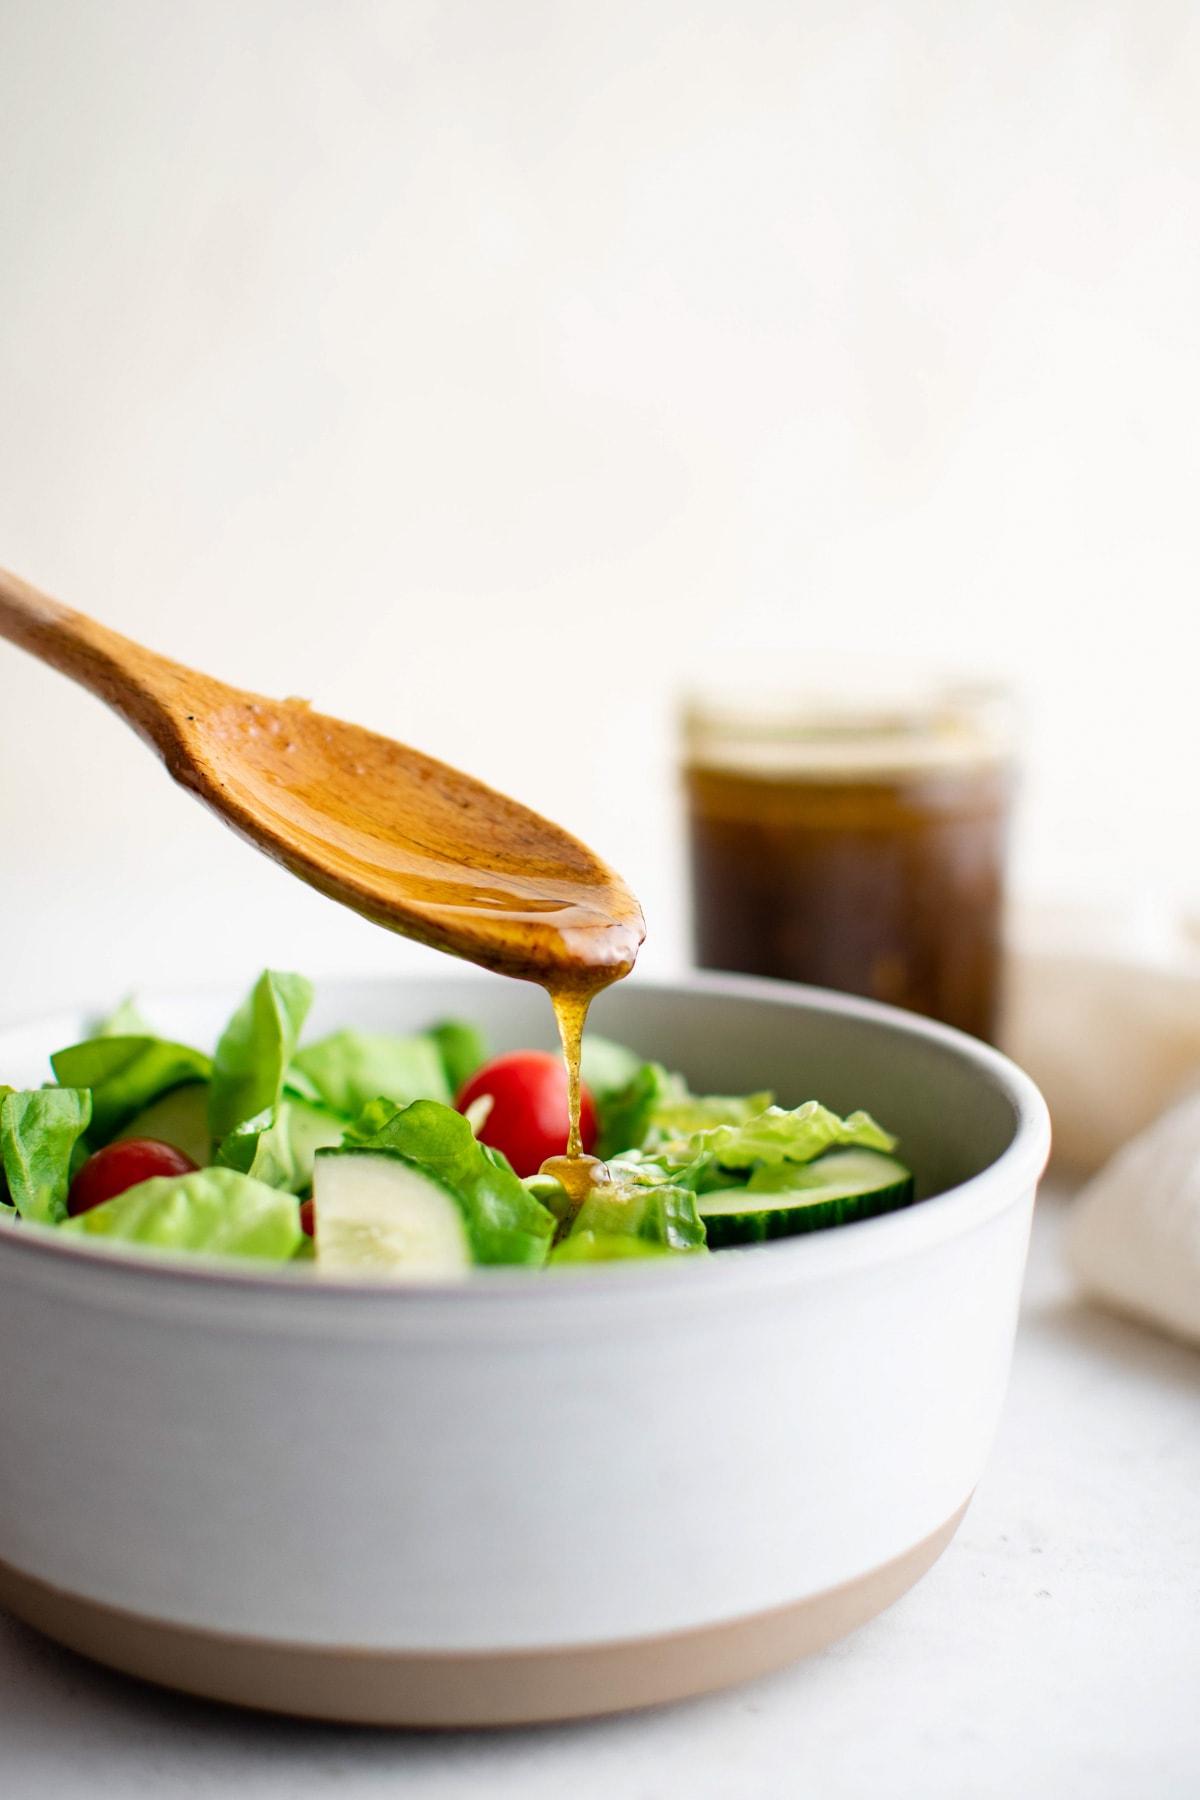 Wooden spoon drizzling balsamic vinaigrette voer a salad in a white bowl.